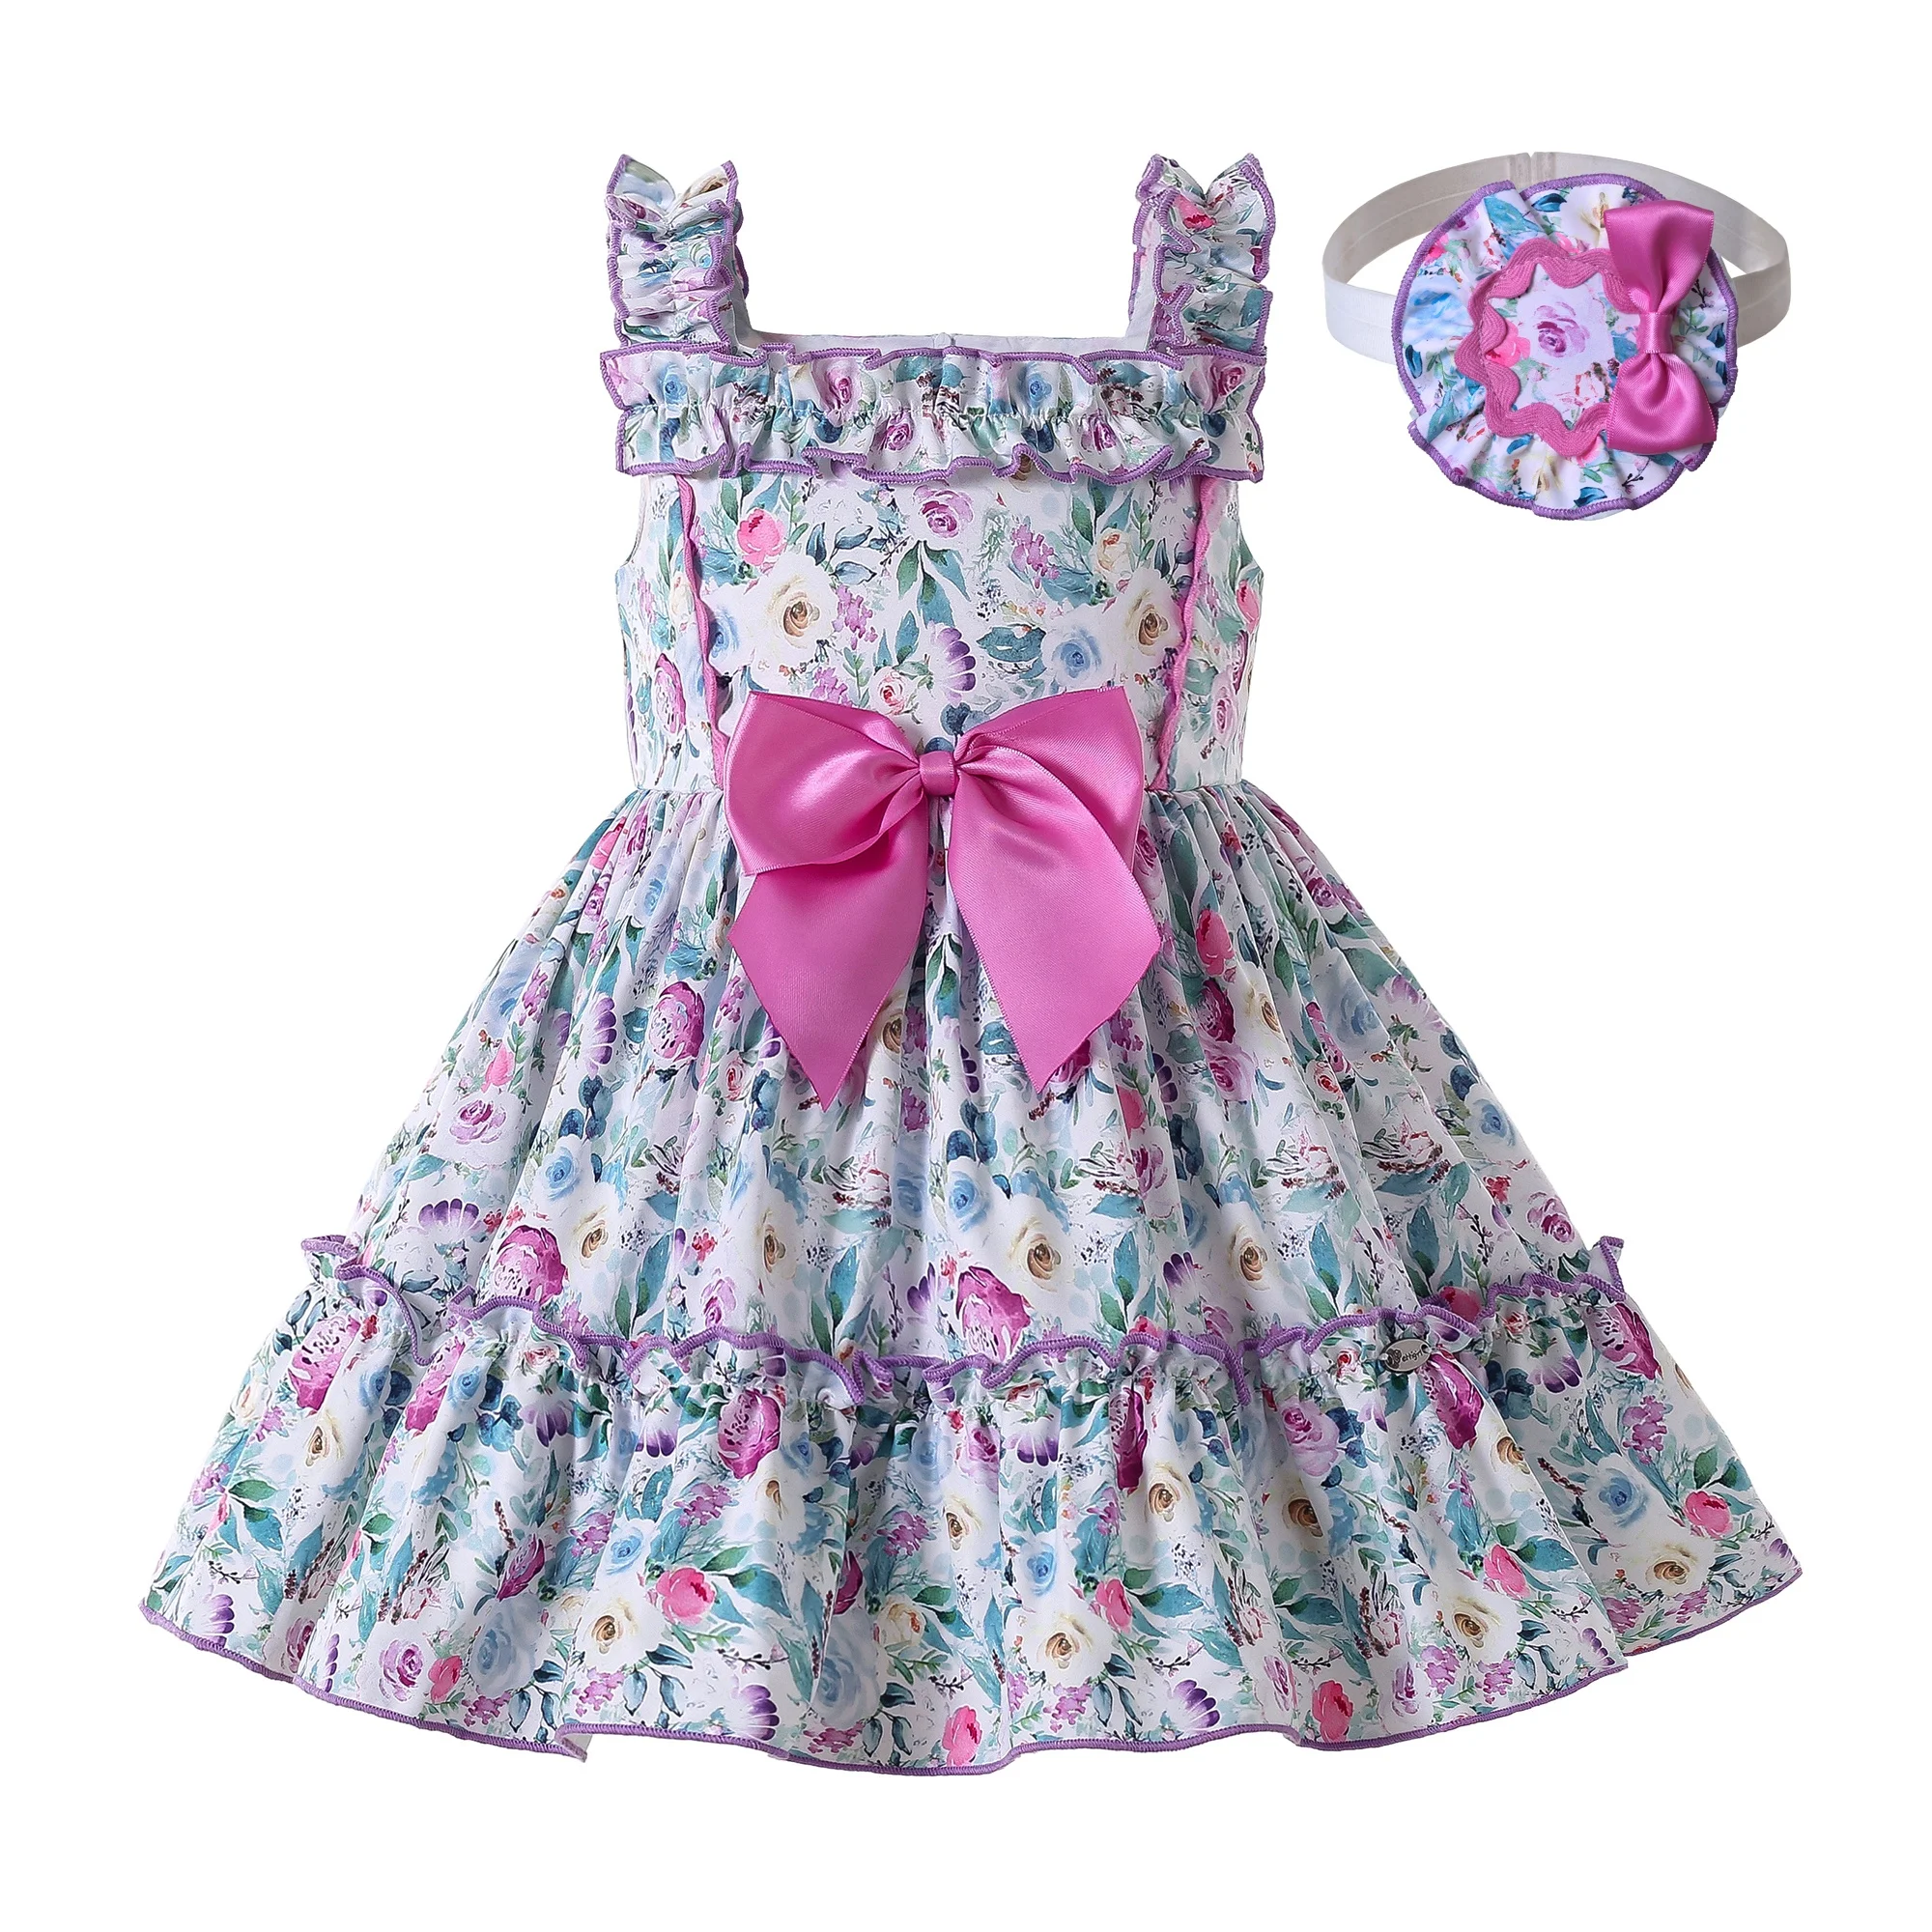 

Pettigirl Baby Girl Clothes Boutique Shoulderless Infant Flower Dresses with Headband